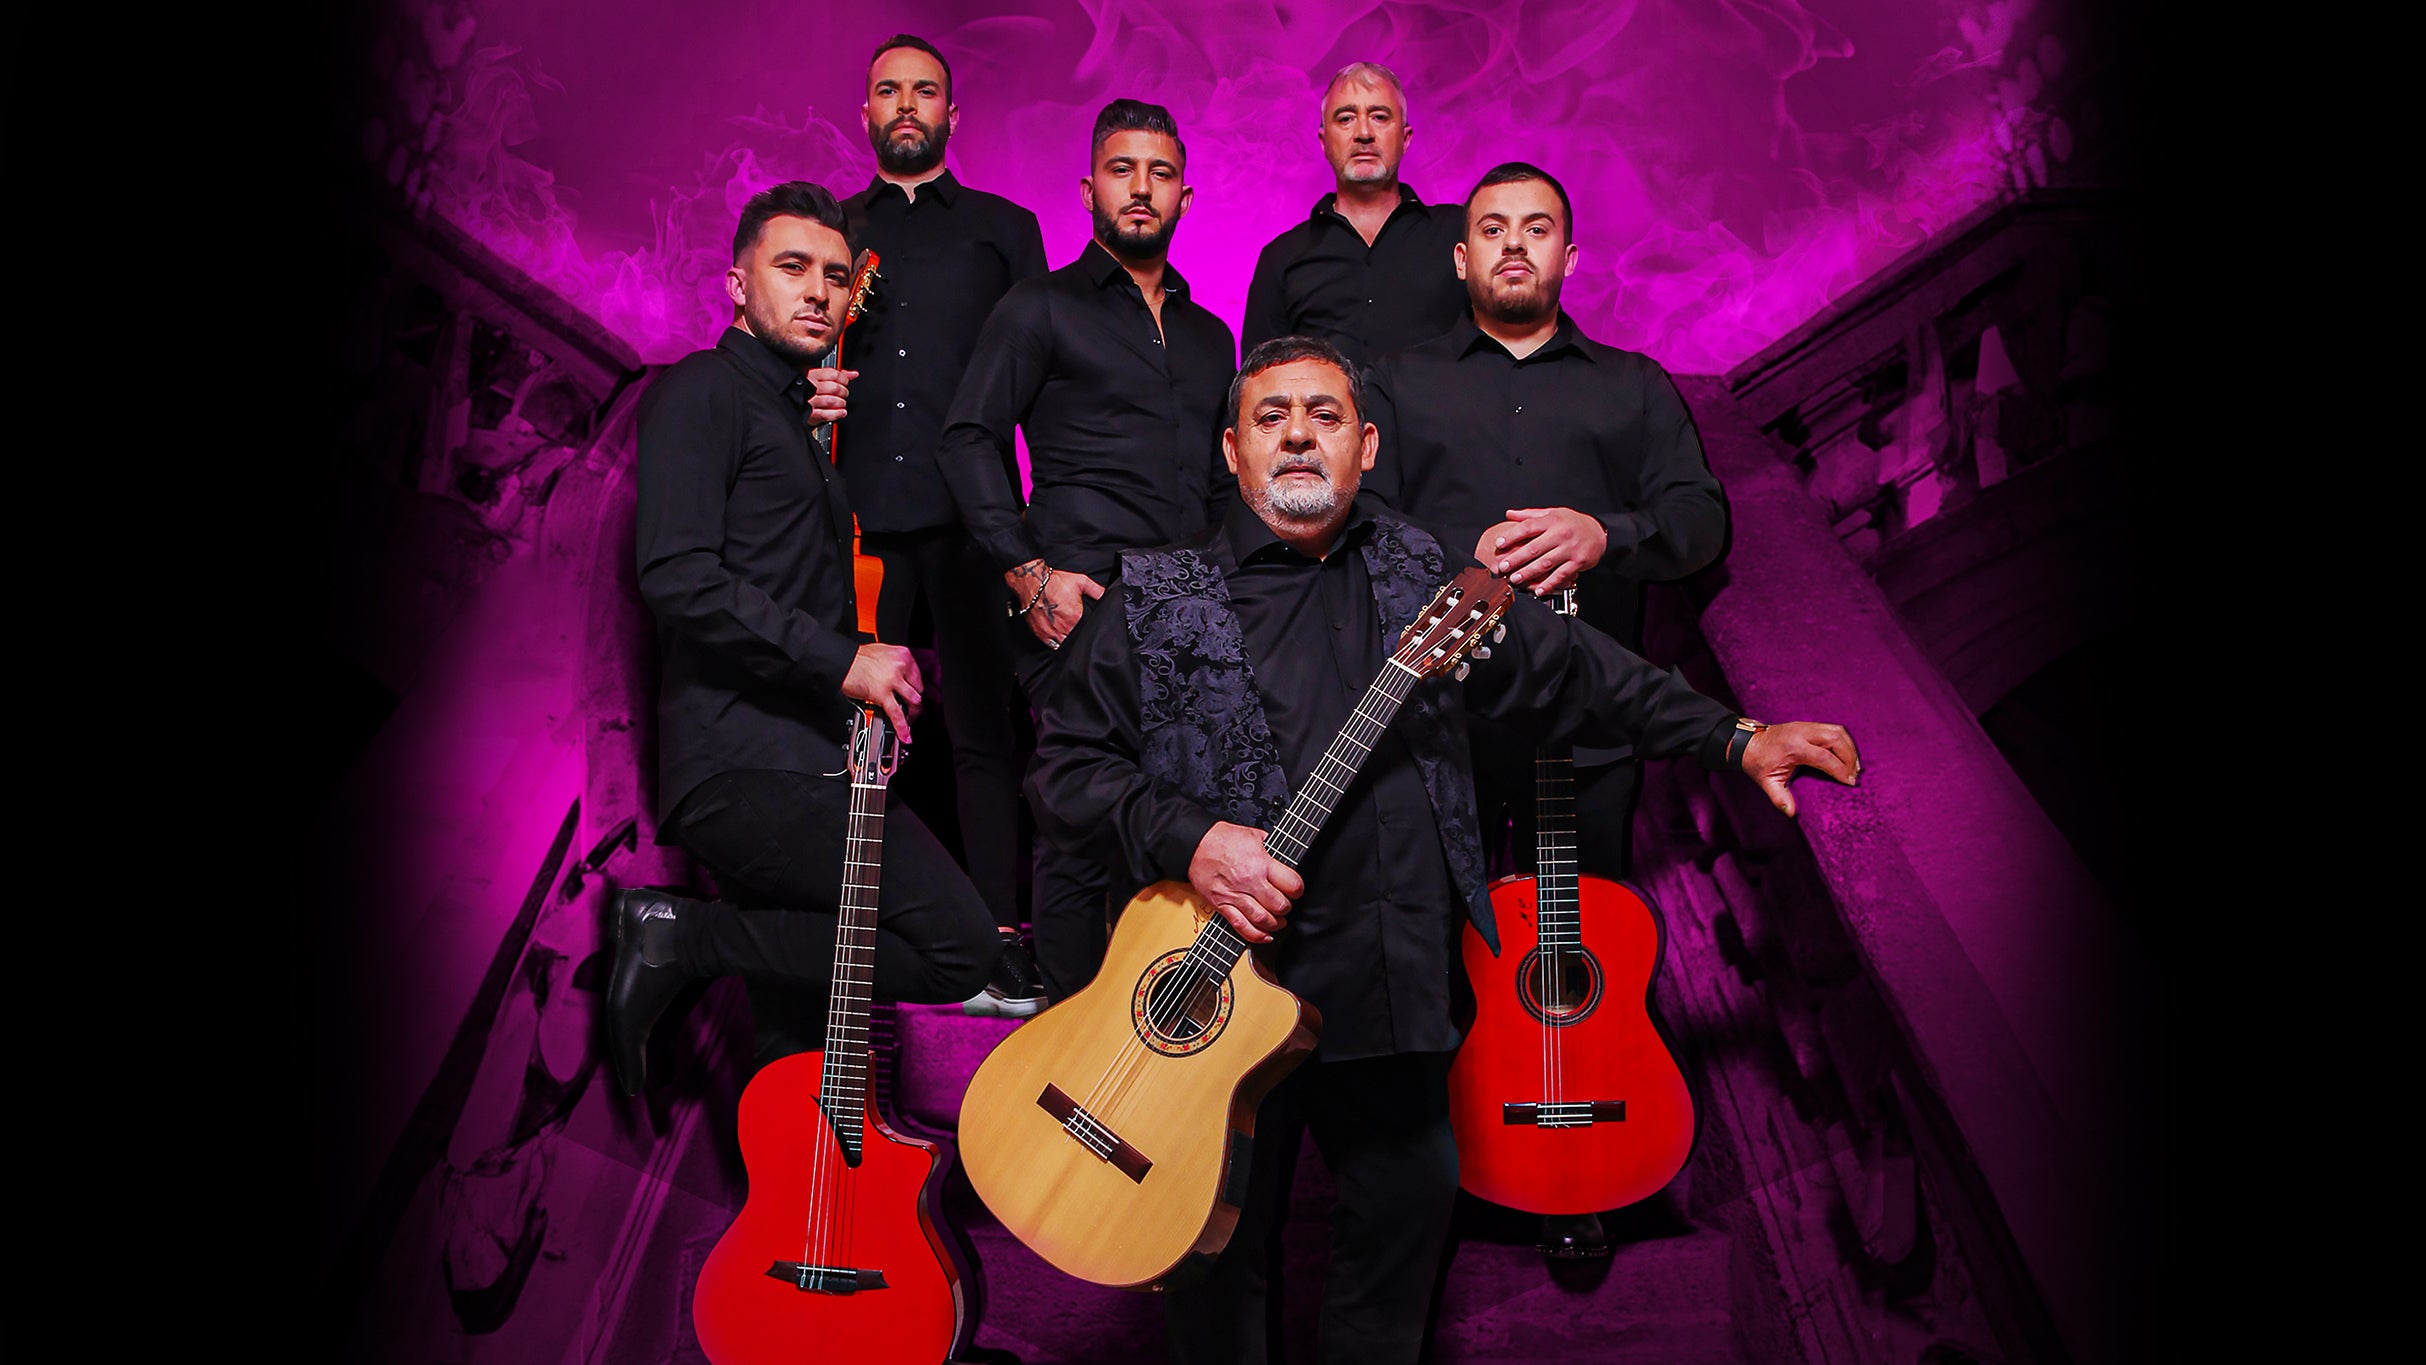 Gipsy Kings featuring Tonino Baliardo: Renaissance Tour presale code for concert tickets in San Diego, CA (San Diego Civic Theatre)